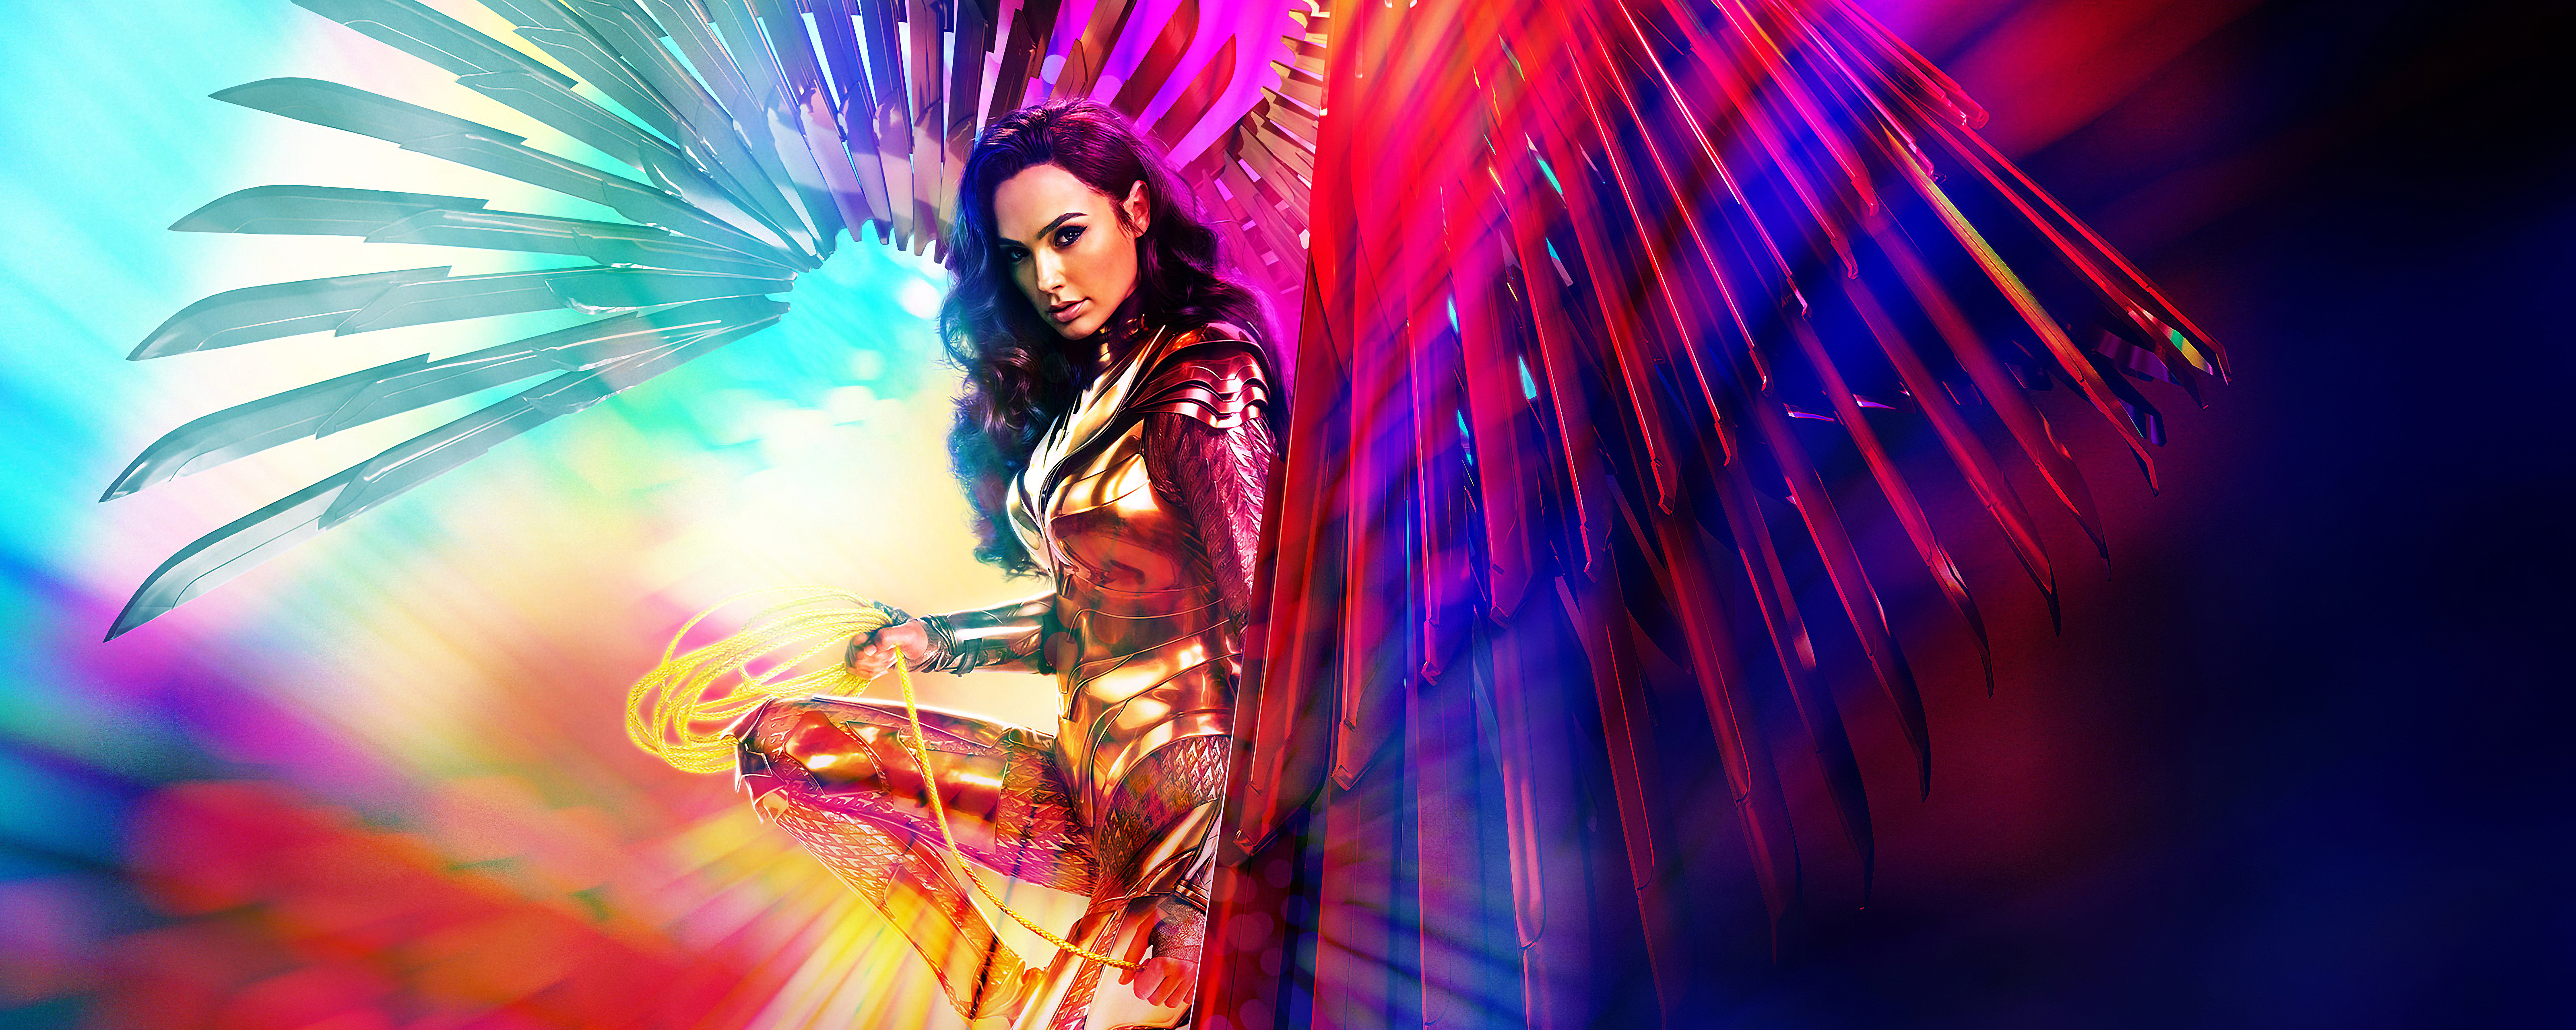 wonder woman 1984, gal gadot, movie, armor, diana prince, lasso of truth, wings, wonder woman for android